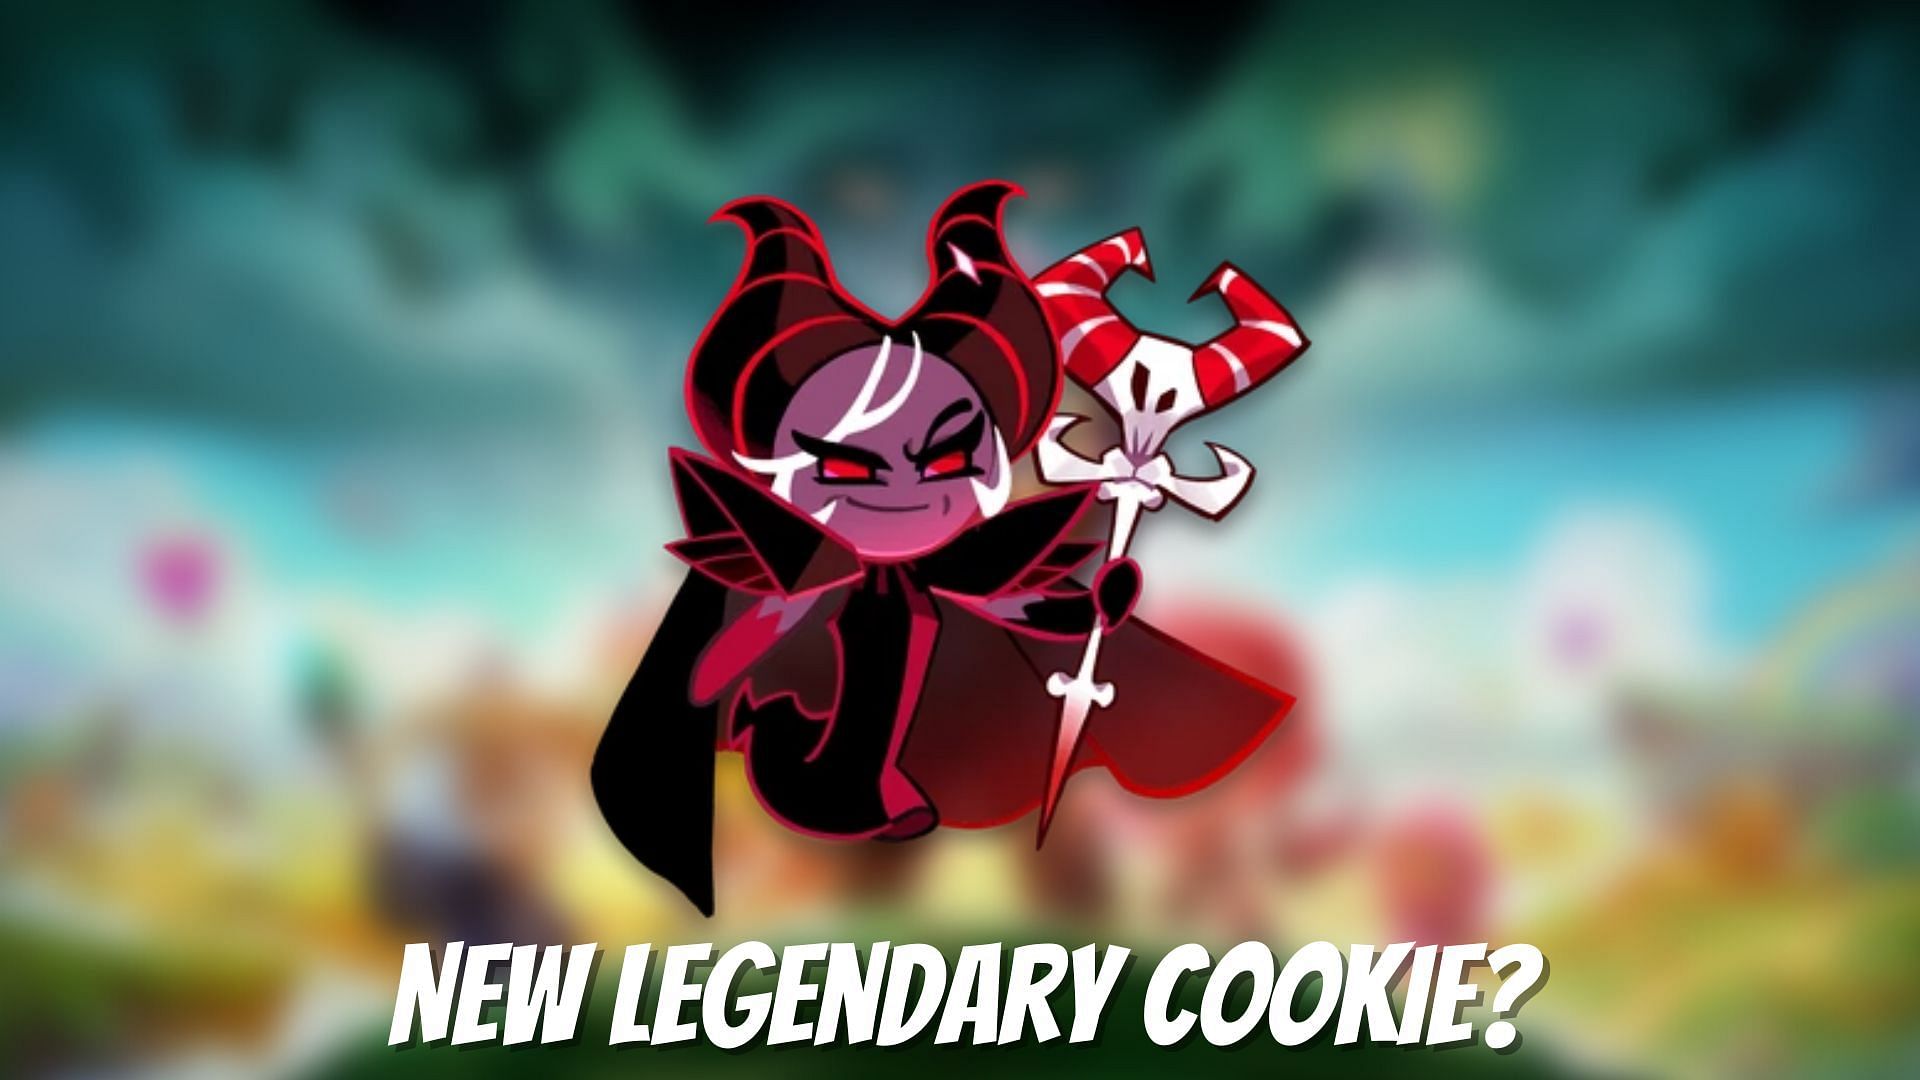 There are three playable Legendary Cookies in the game currently (Image via Sportskeeda)